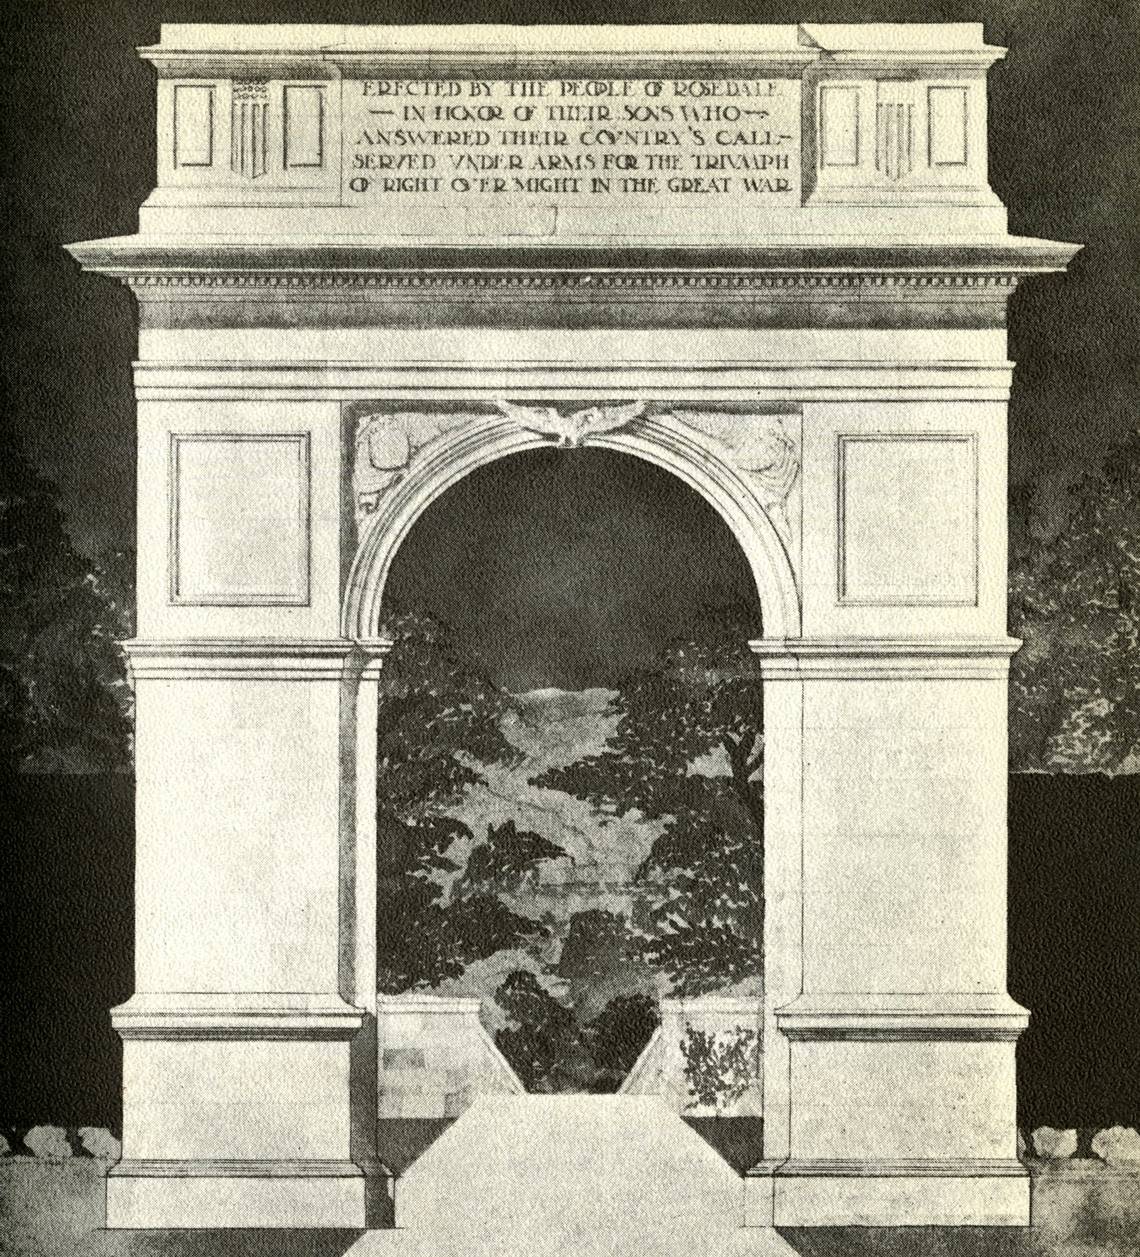 Rosedale Memorial Arch drawing by John Leroy Marshall. KANSAS CITY PUBLIC LIBRARY